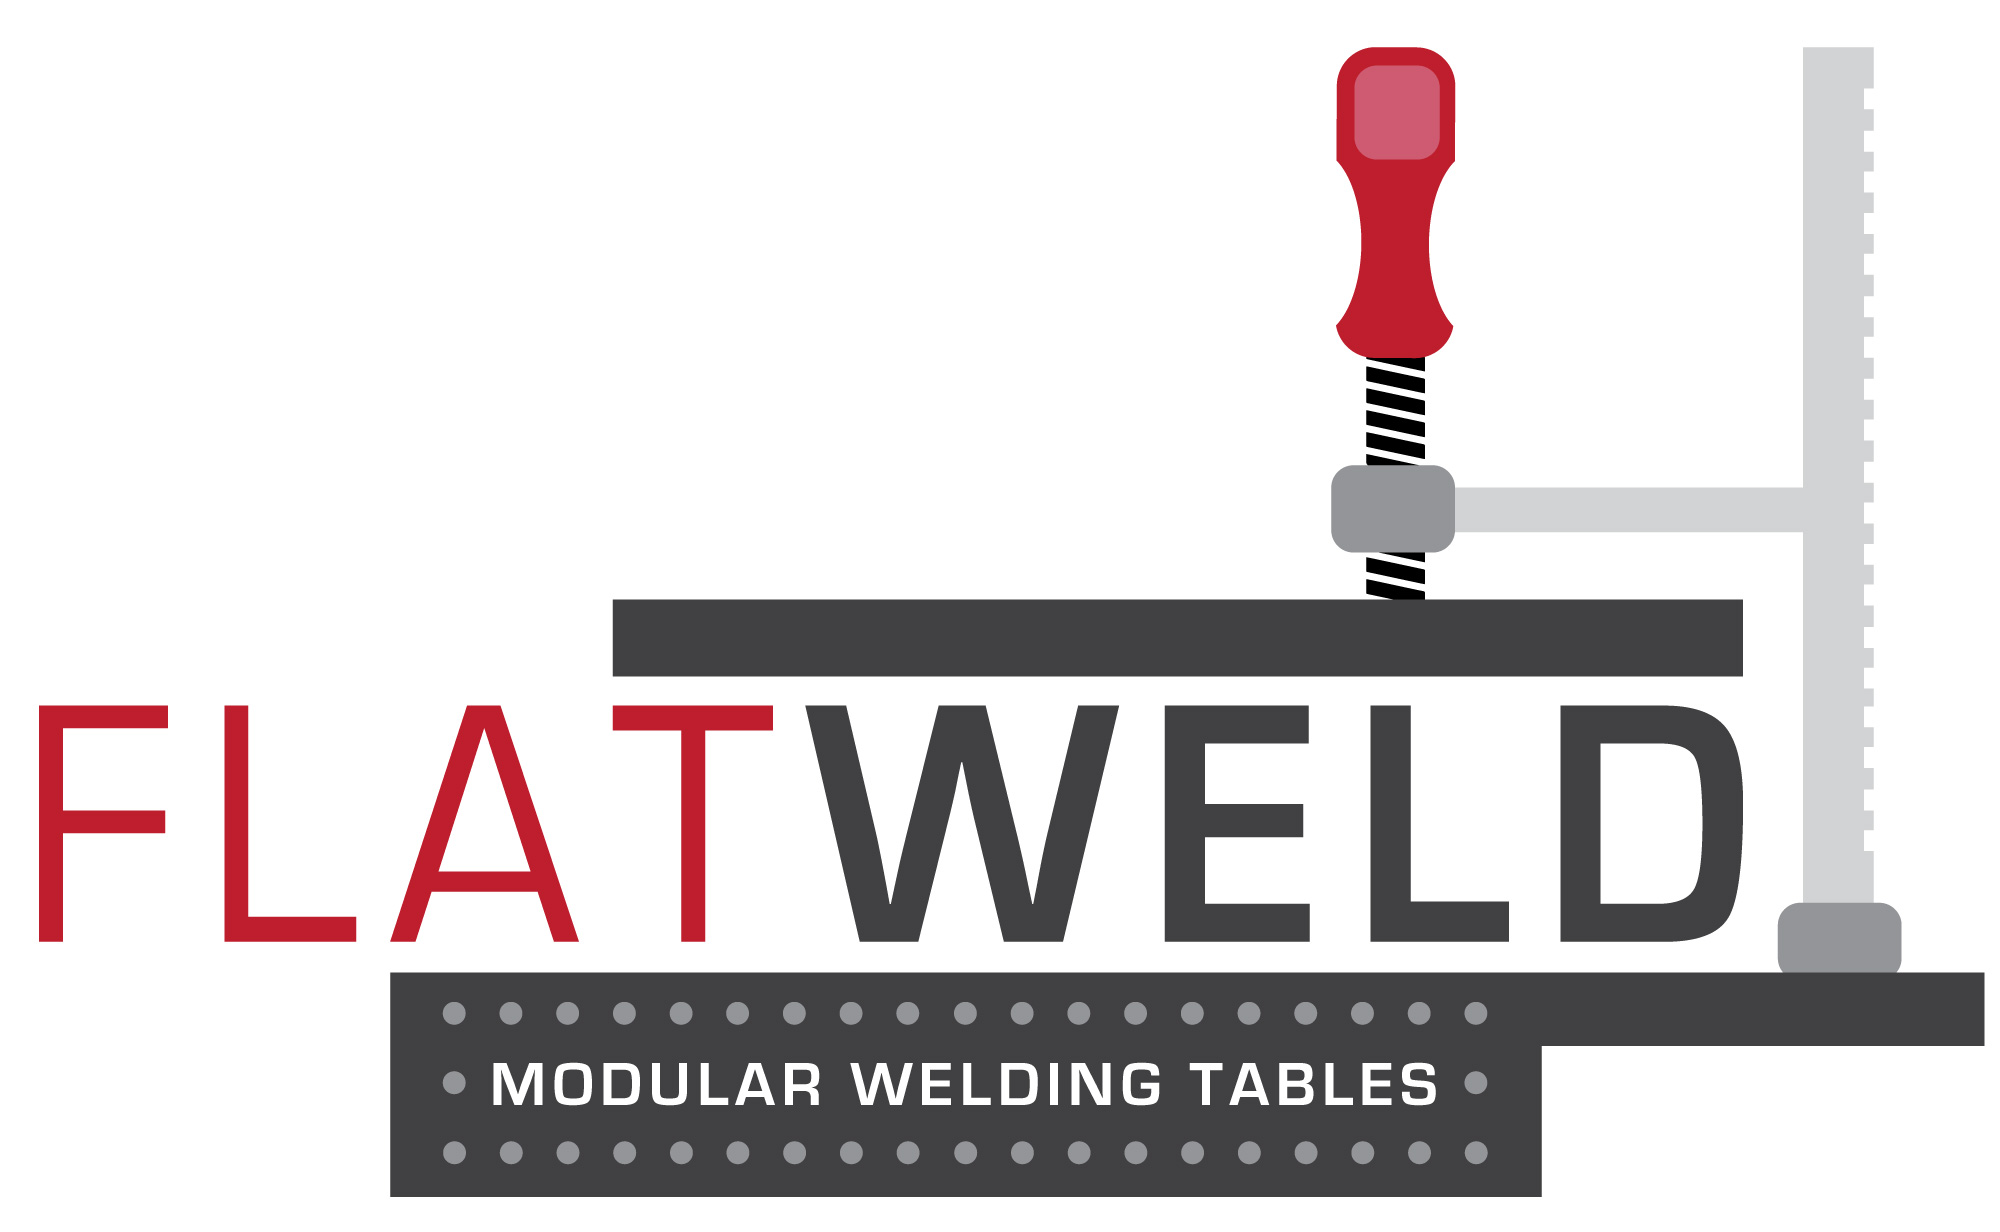 Prices for Flatweld Modular Welding Tables